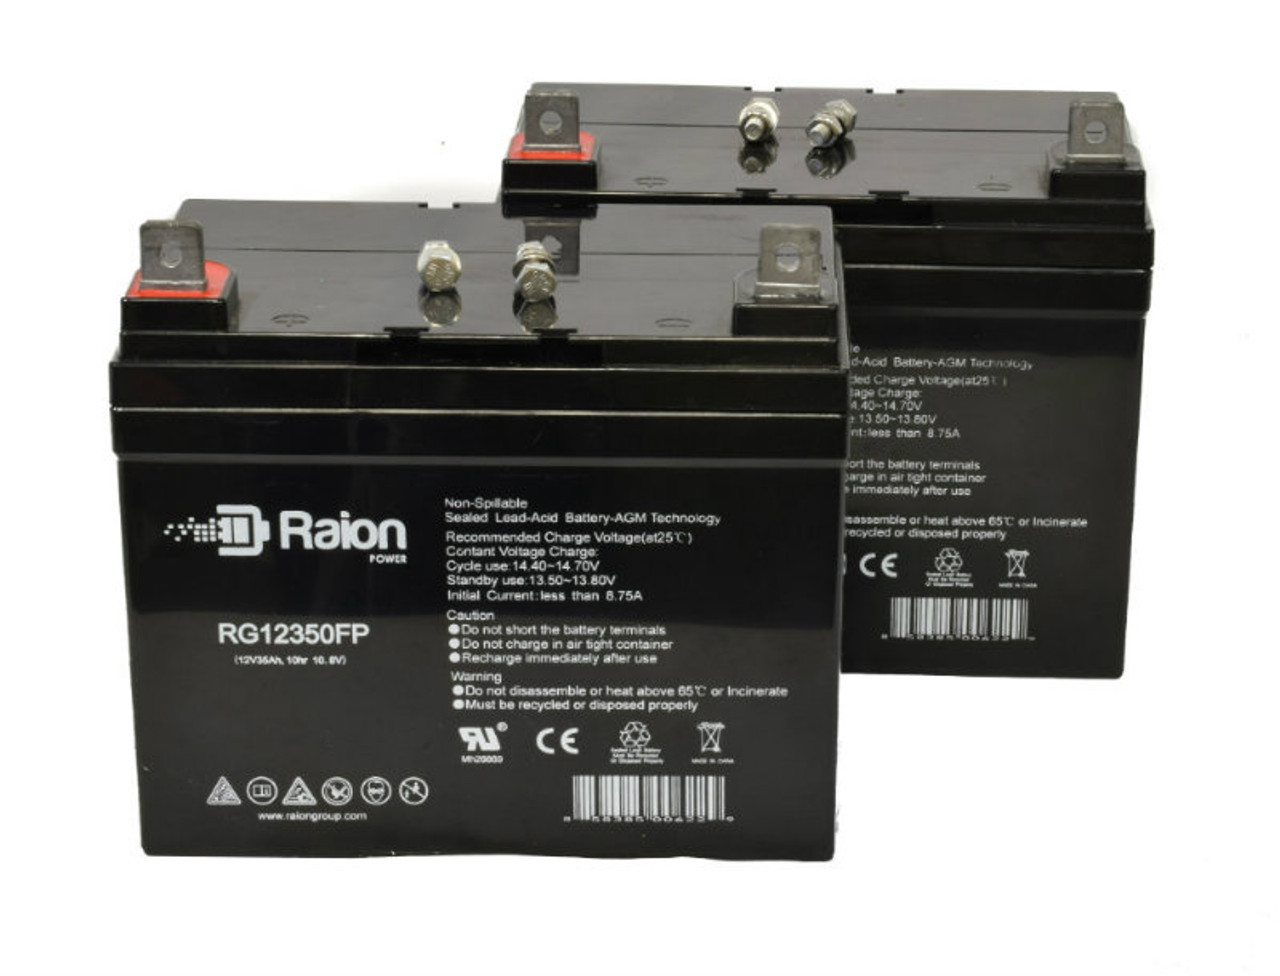 Raion Power Replacement 12V 35Ah Lawn Mower Battery for Case International 644 - 2 Pack